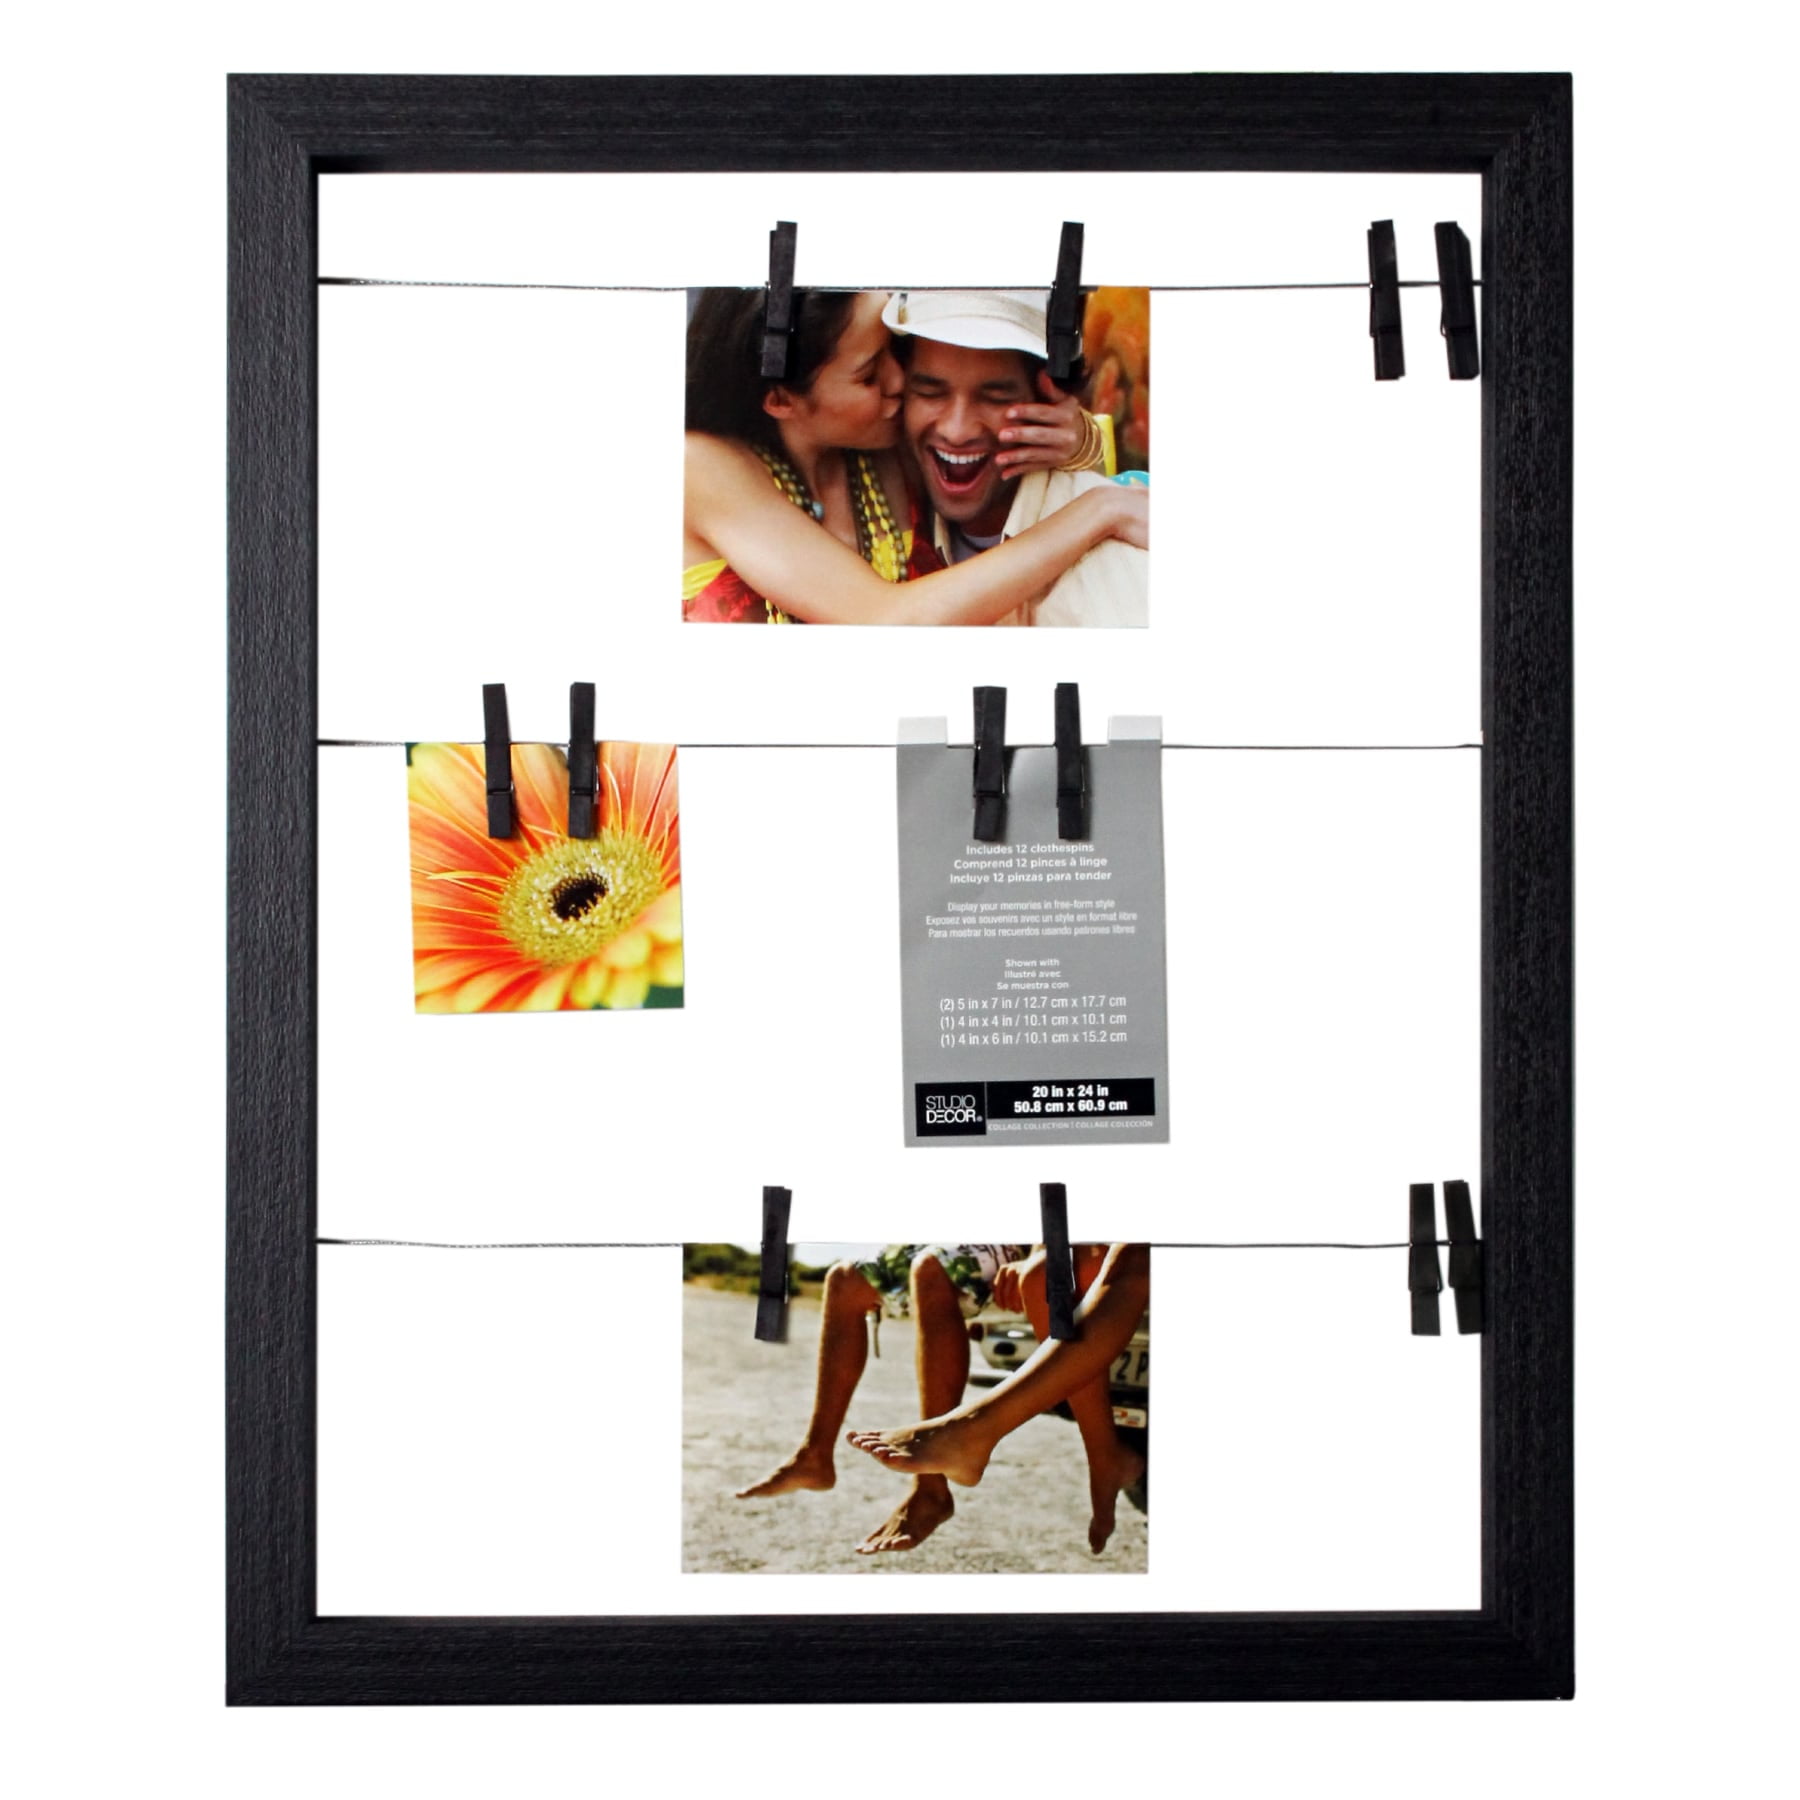 Wholesale picture frame backing clips For Entertainment and Work